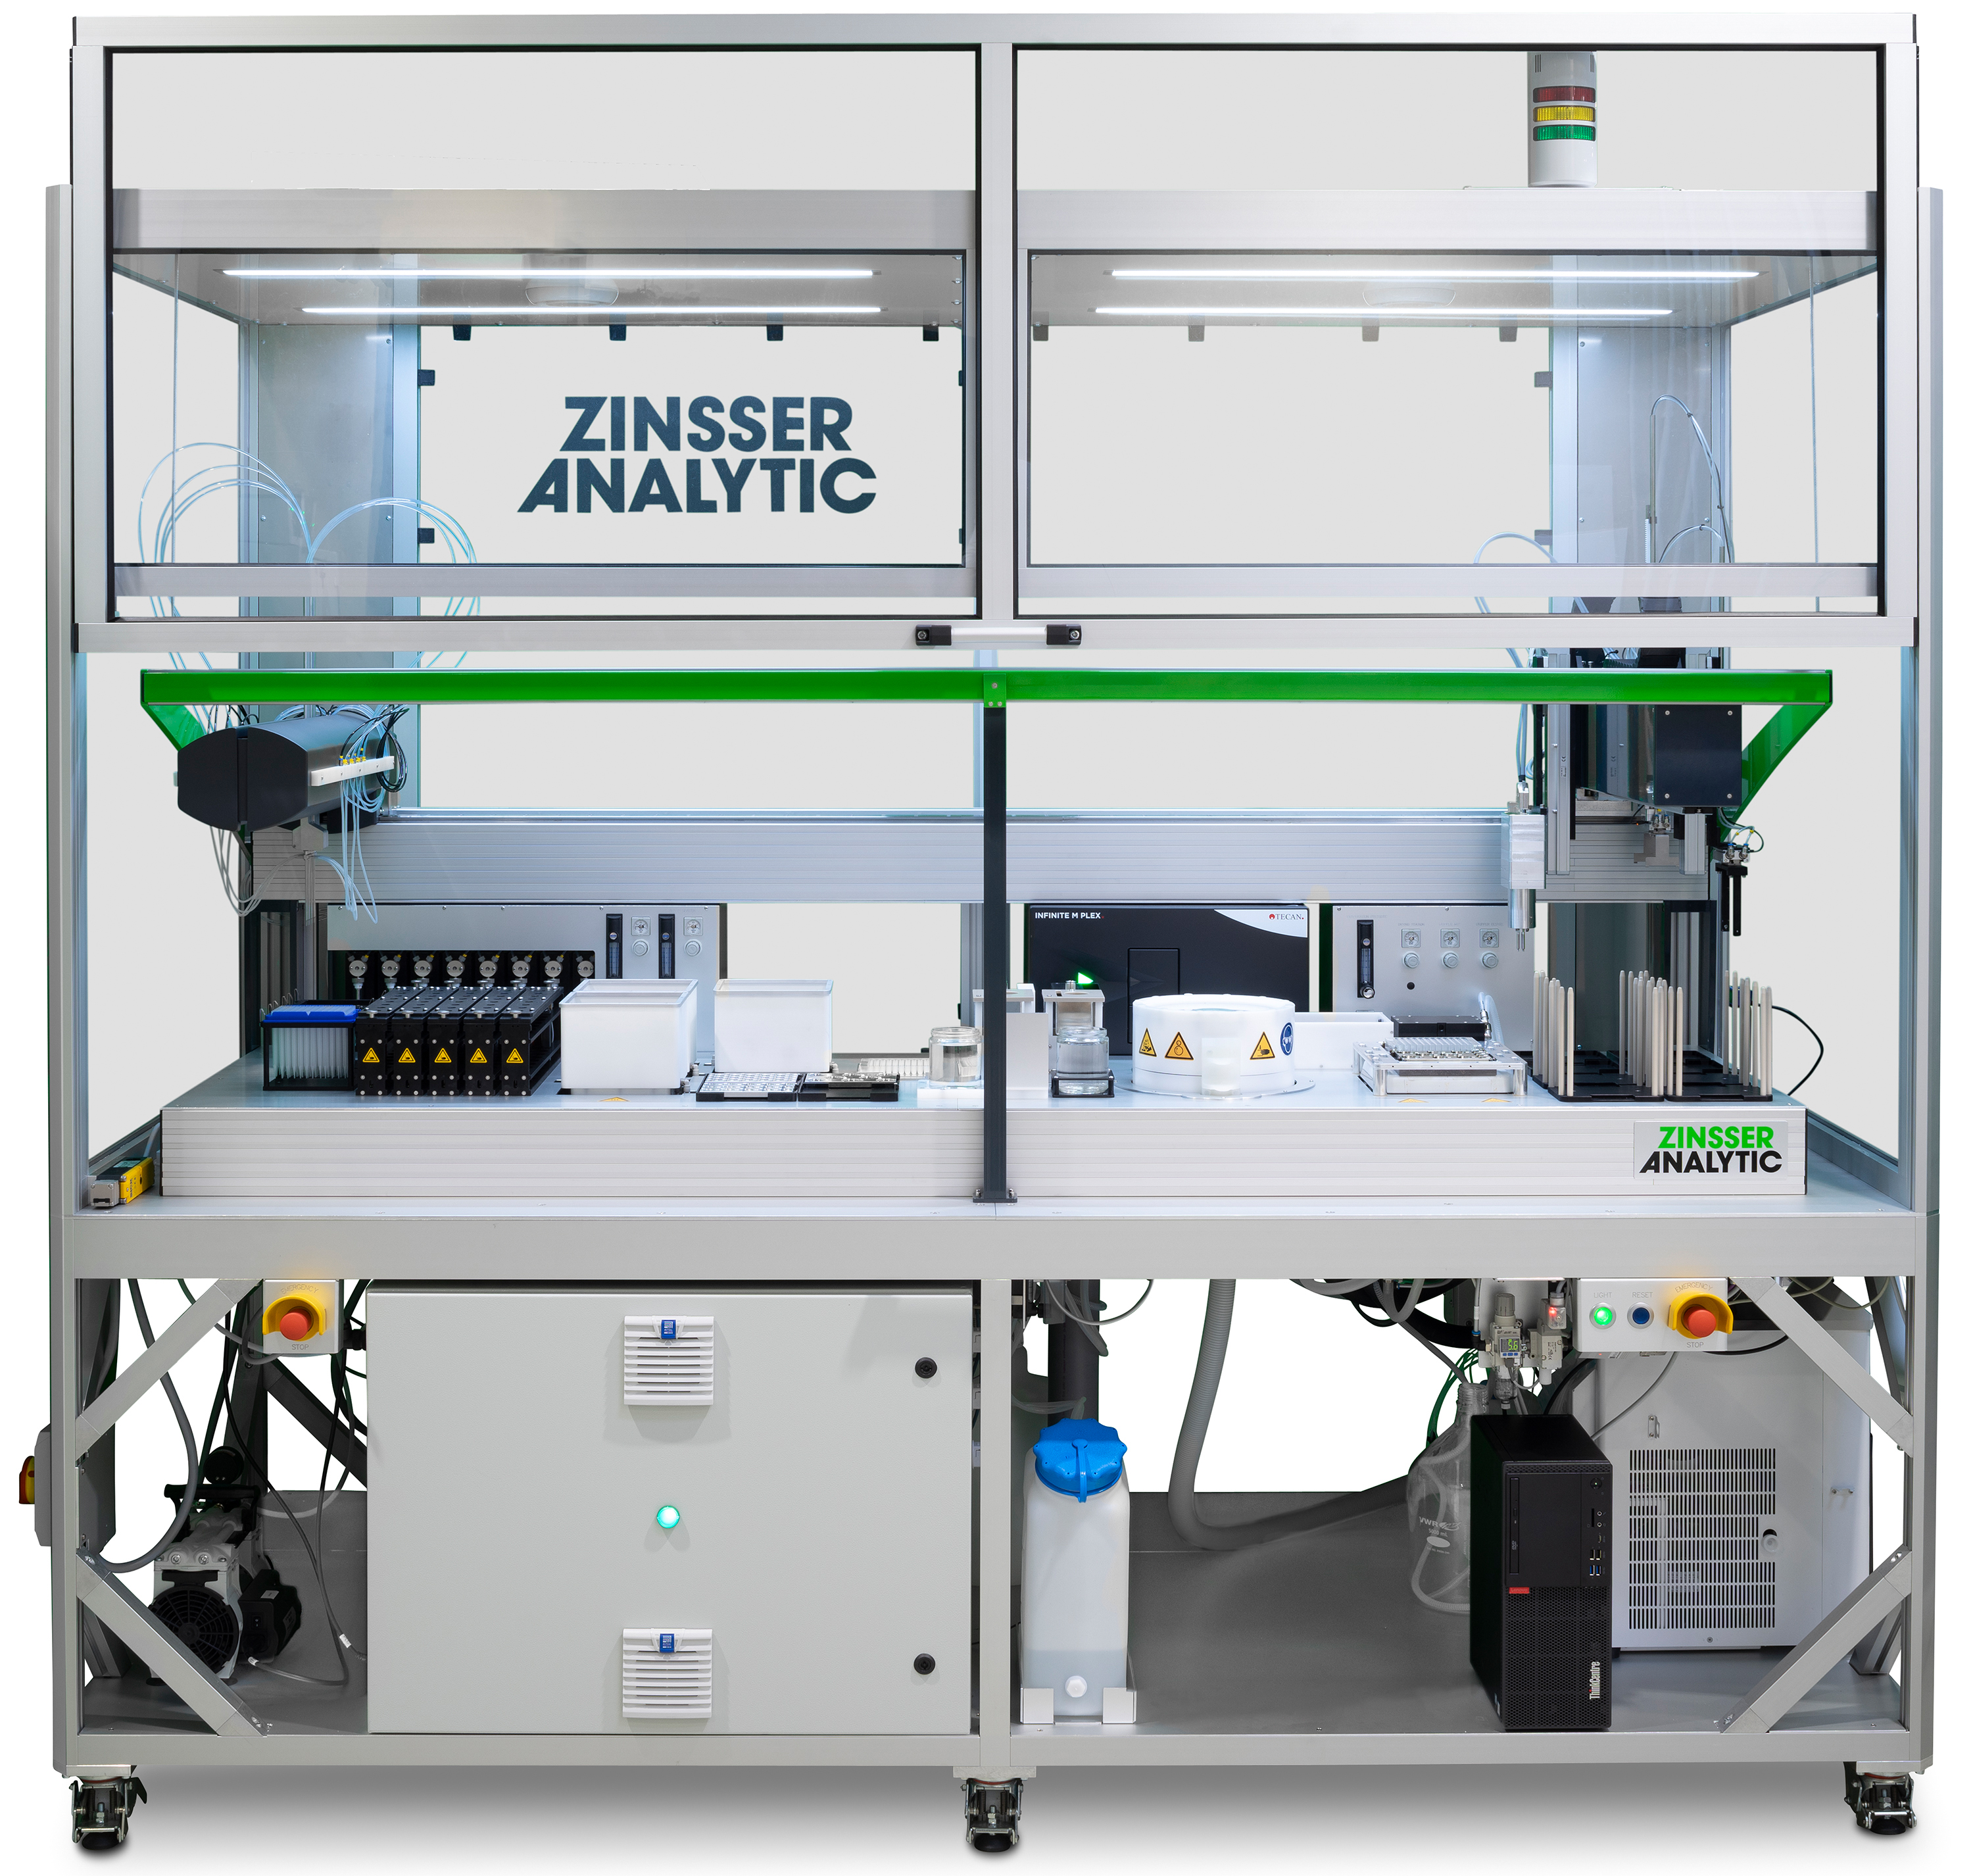 zinsser lissy spin coating research workflow automation system